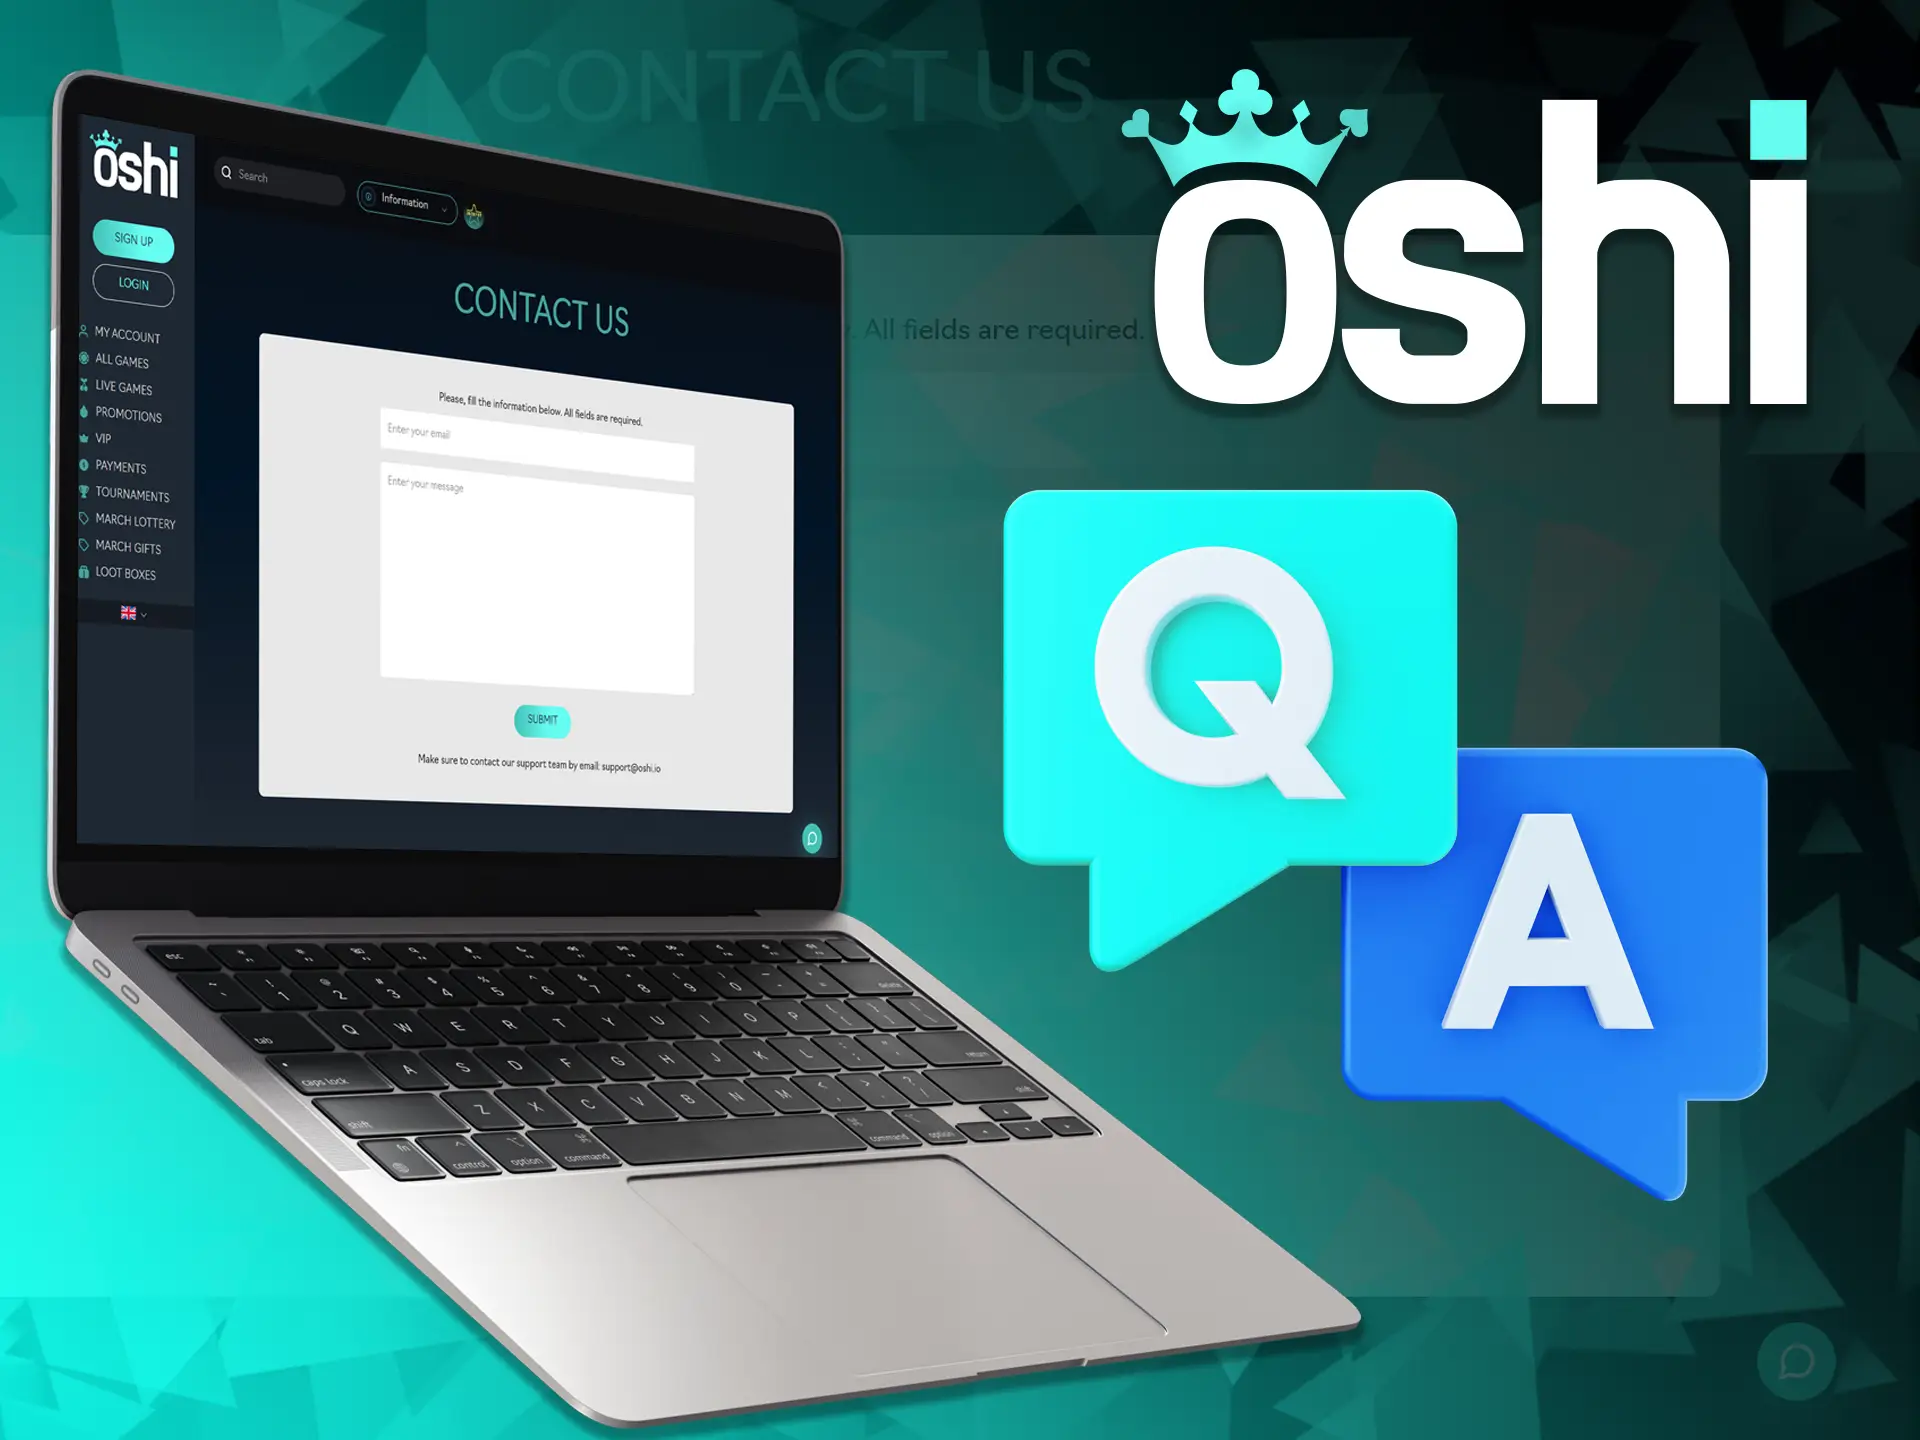 You can promptly get assistance with your questions and concerns by contacting Oshi Online Casino support.